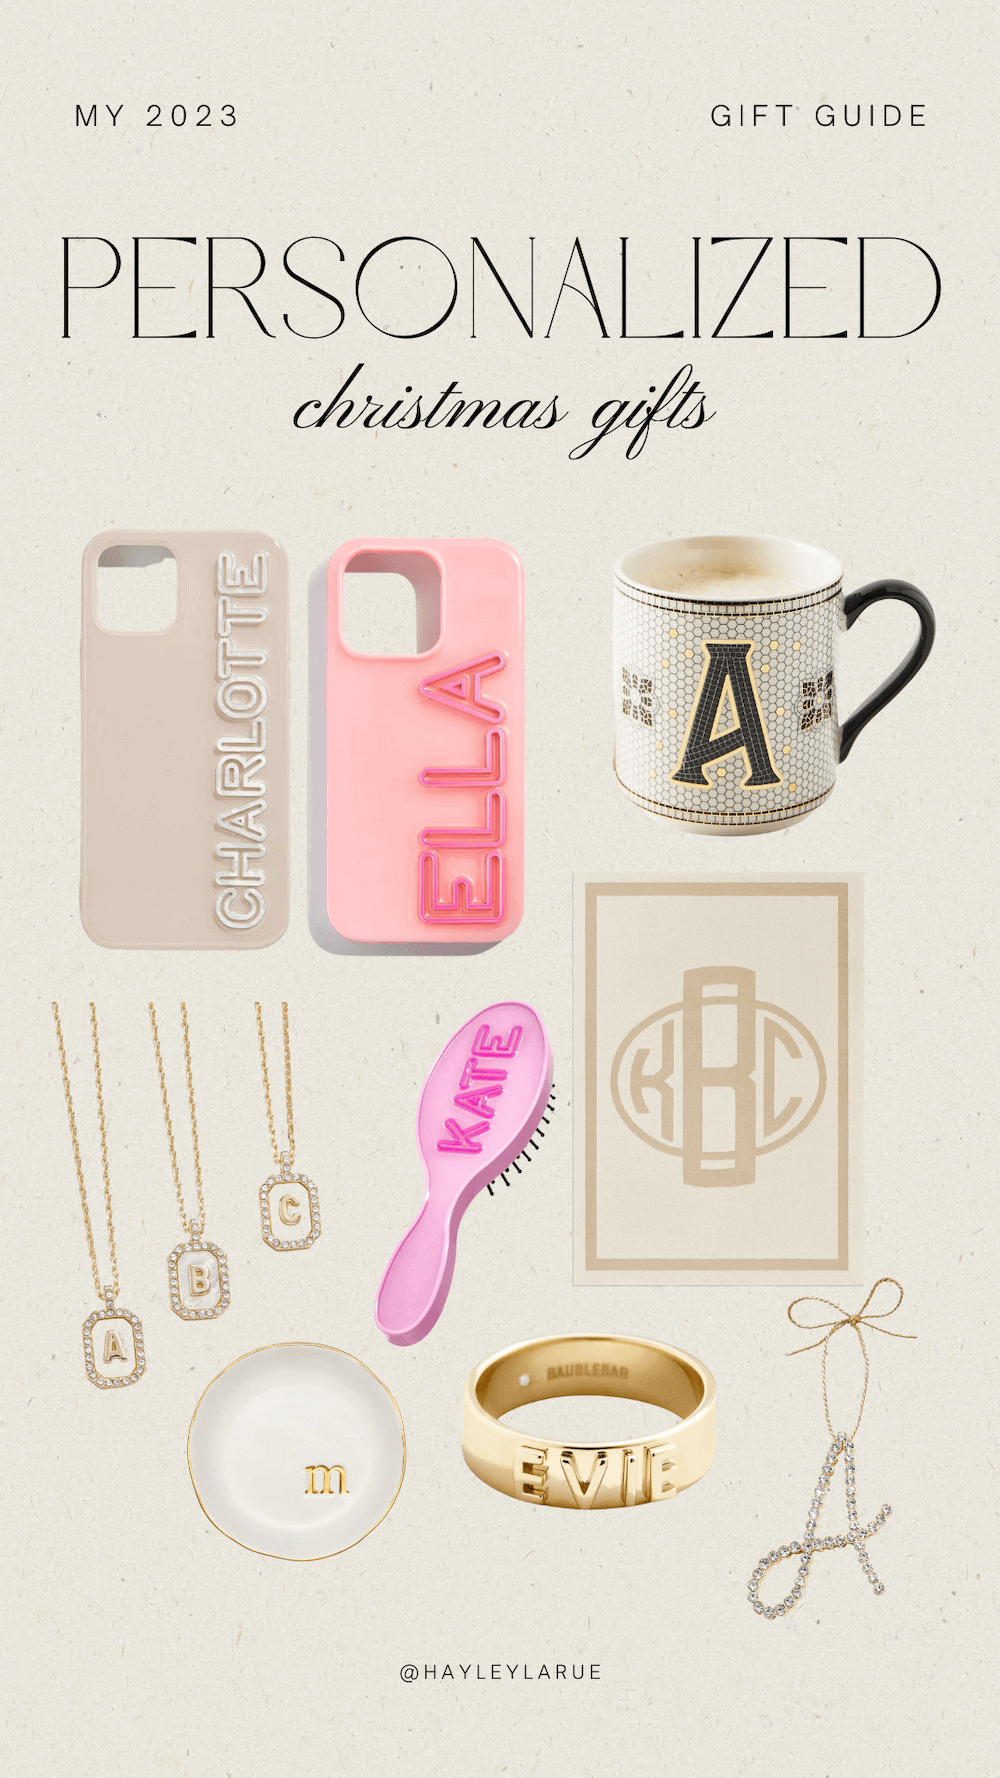 Personalized Christmas gifts